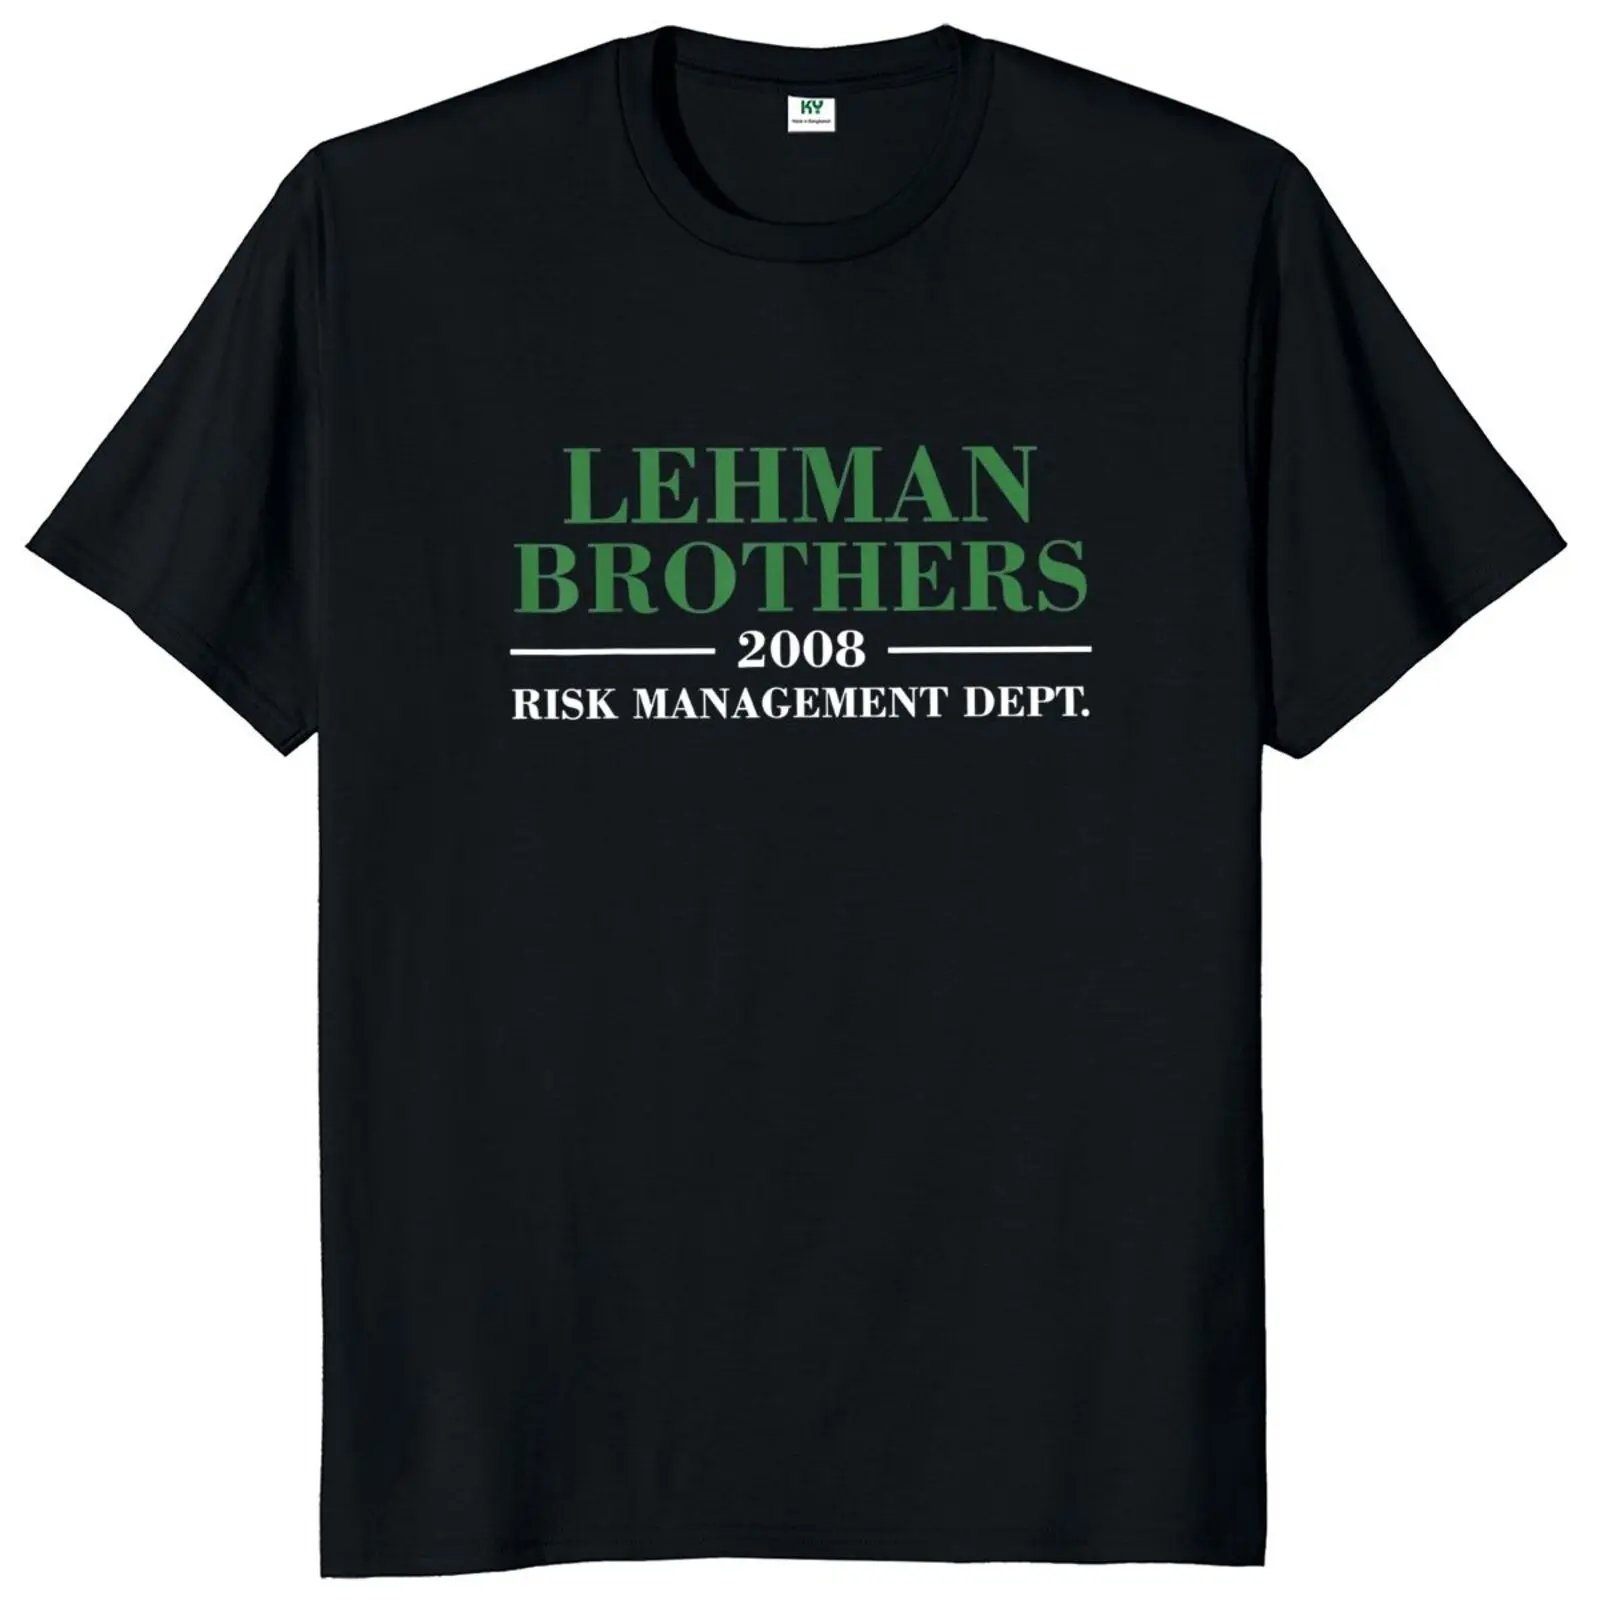 Lehman Brothers 2008 Risk Management Dept T Shirt 2022 Trending Casual Men's Fashion Tshirt For Investors Traders T-Shirts